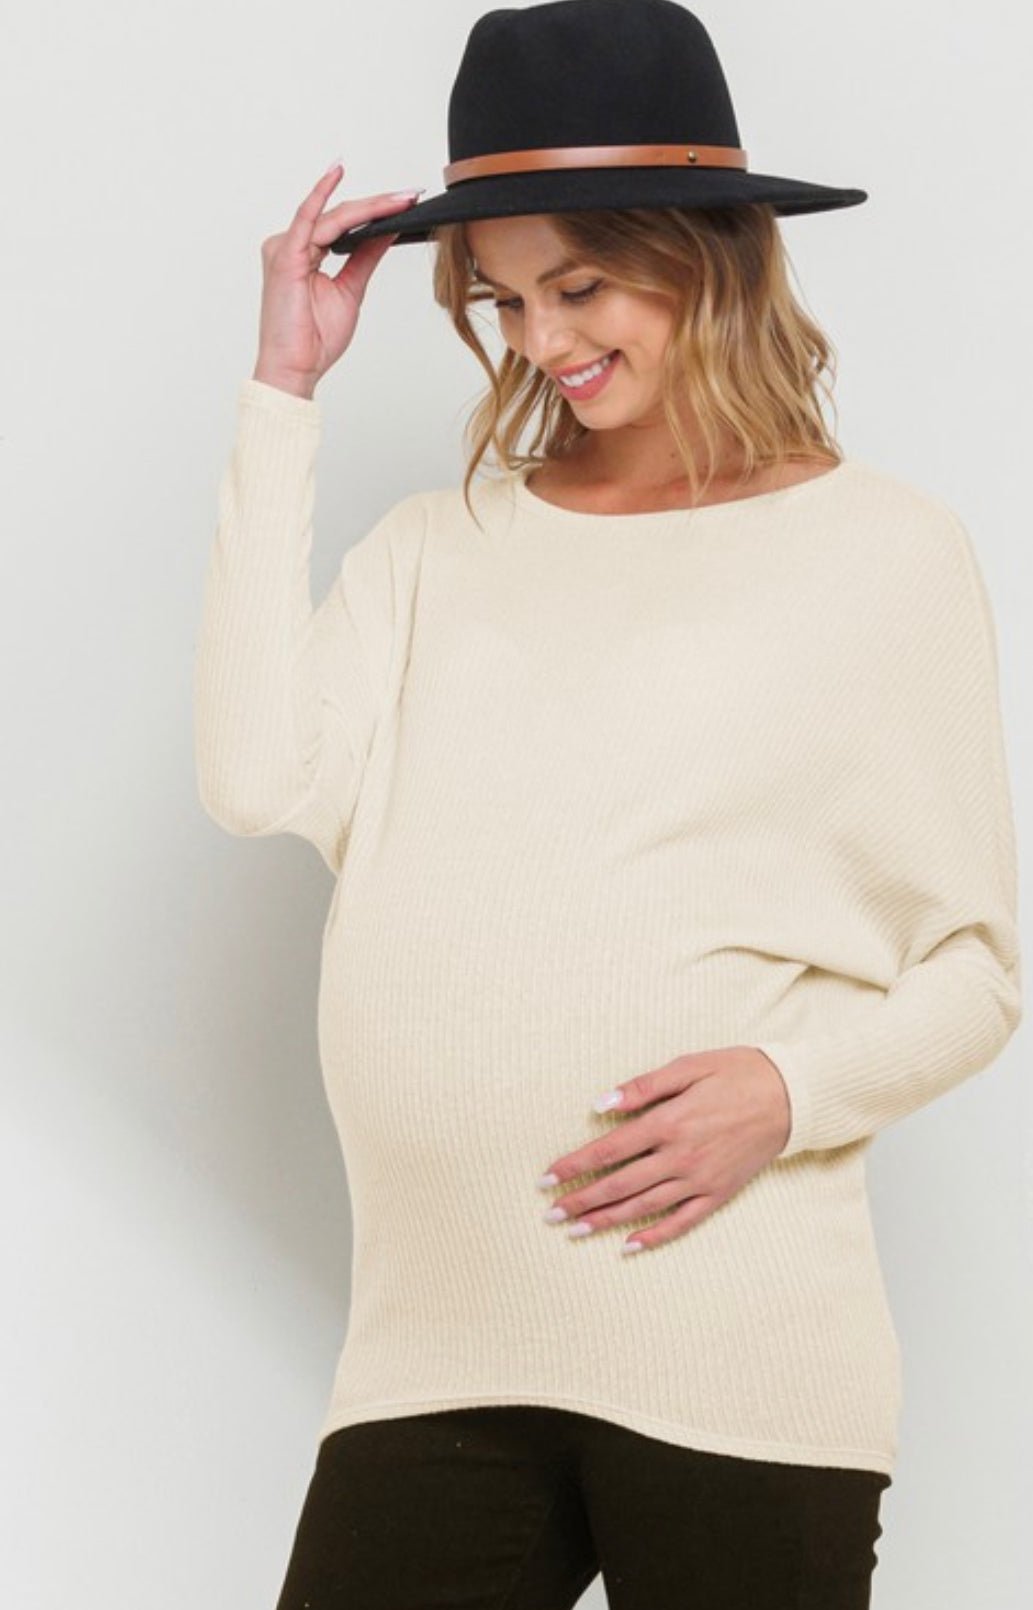 White Sweater Weather Top - The Bump & Company LLC